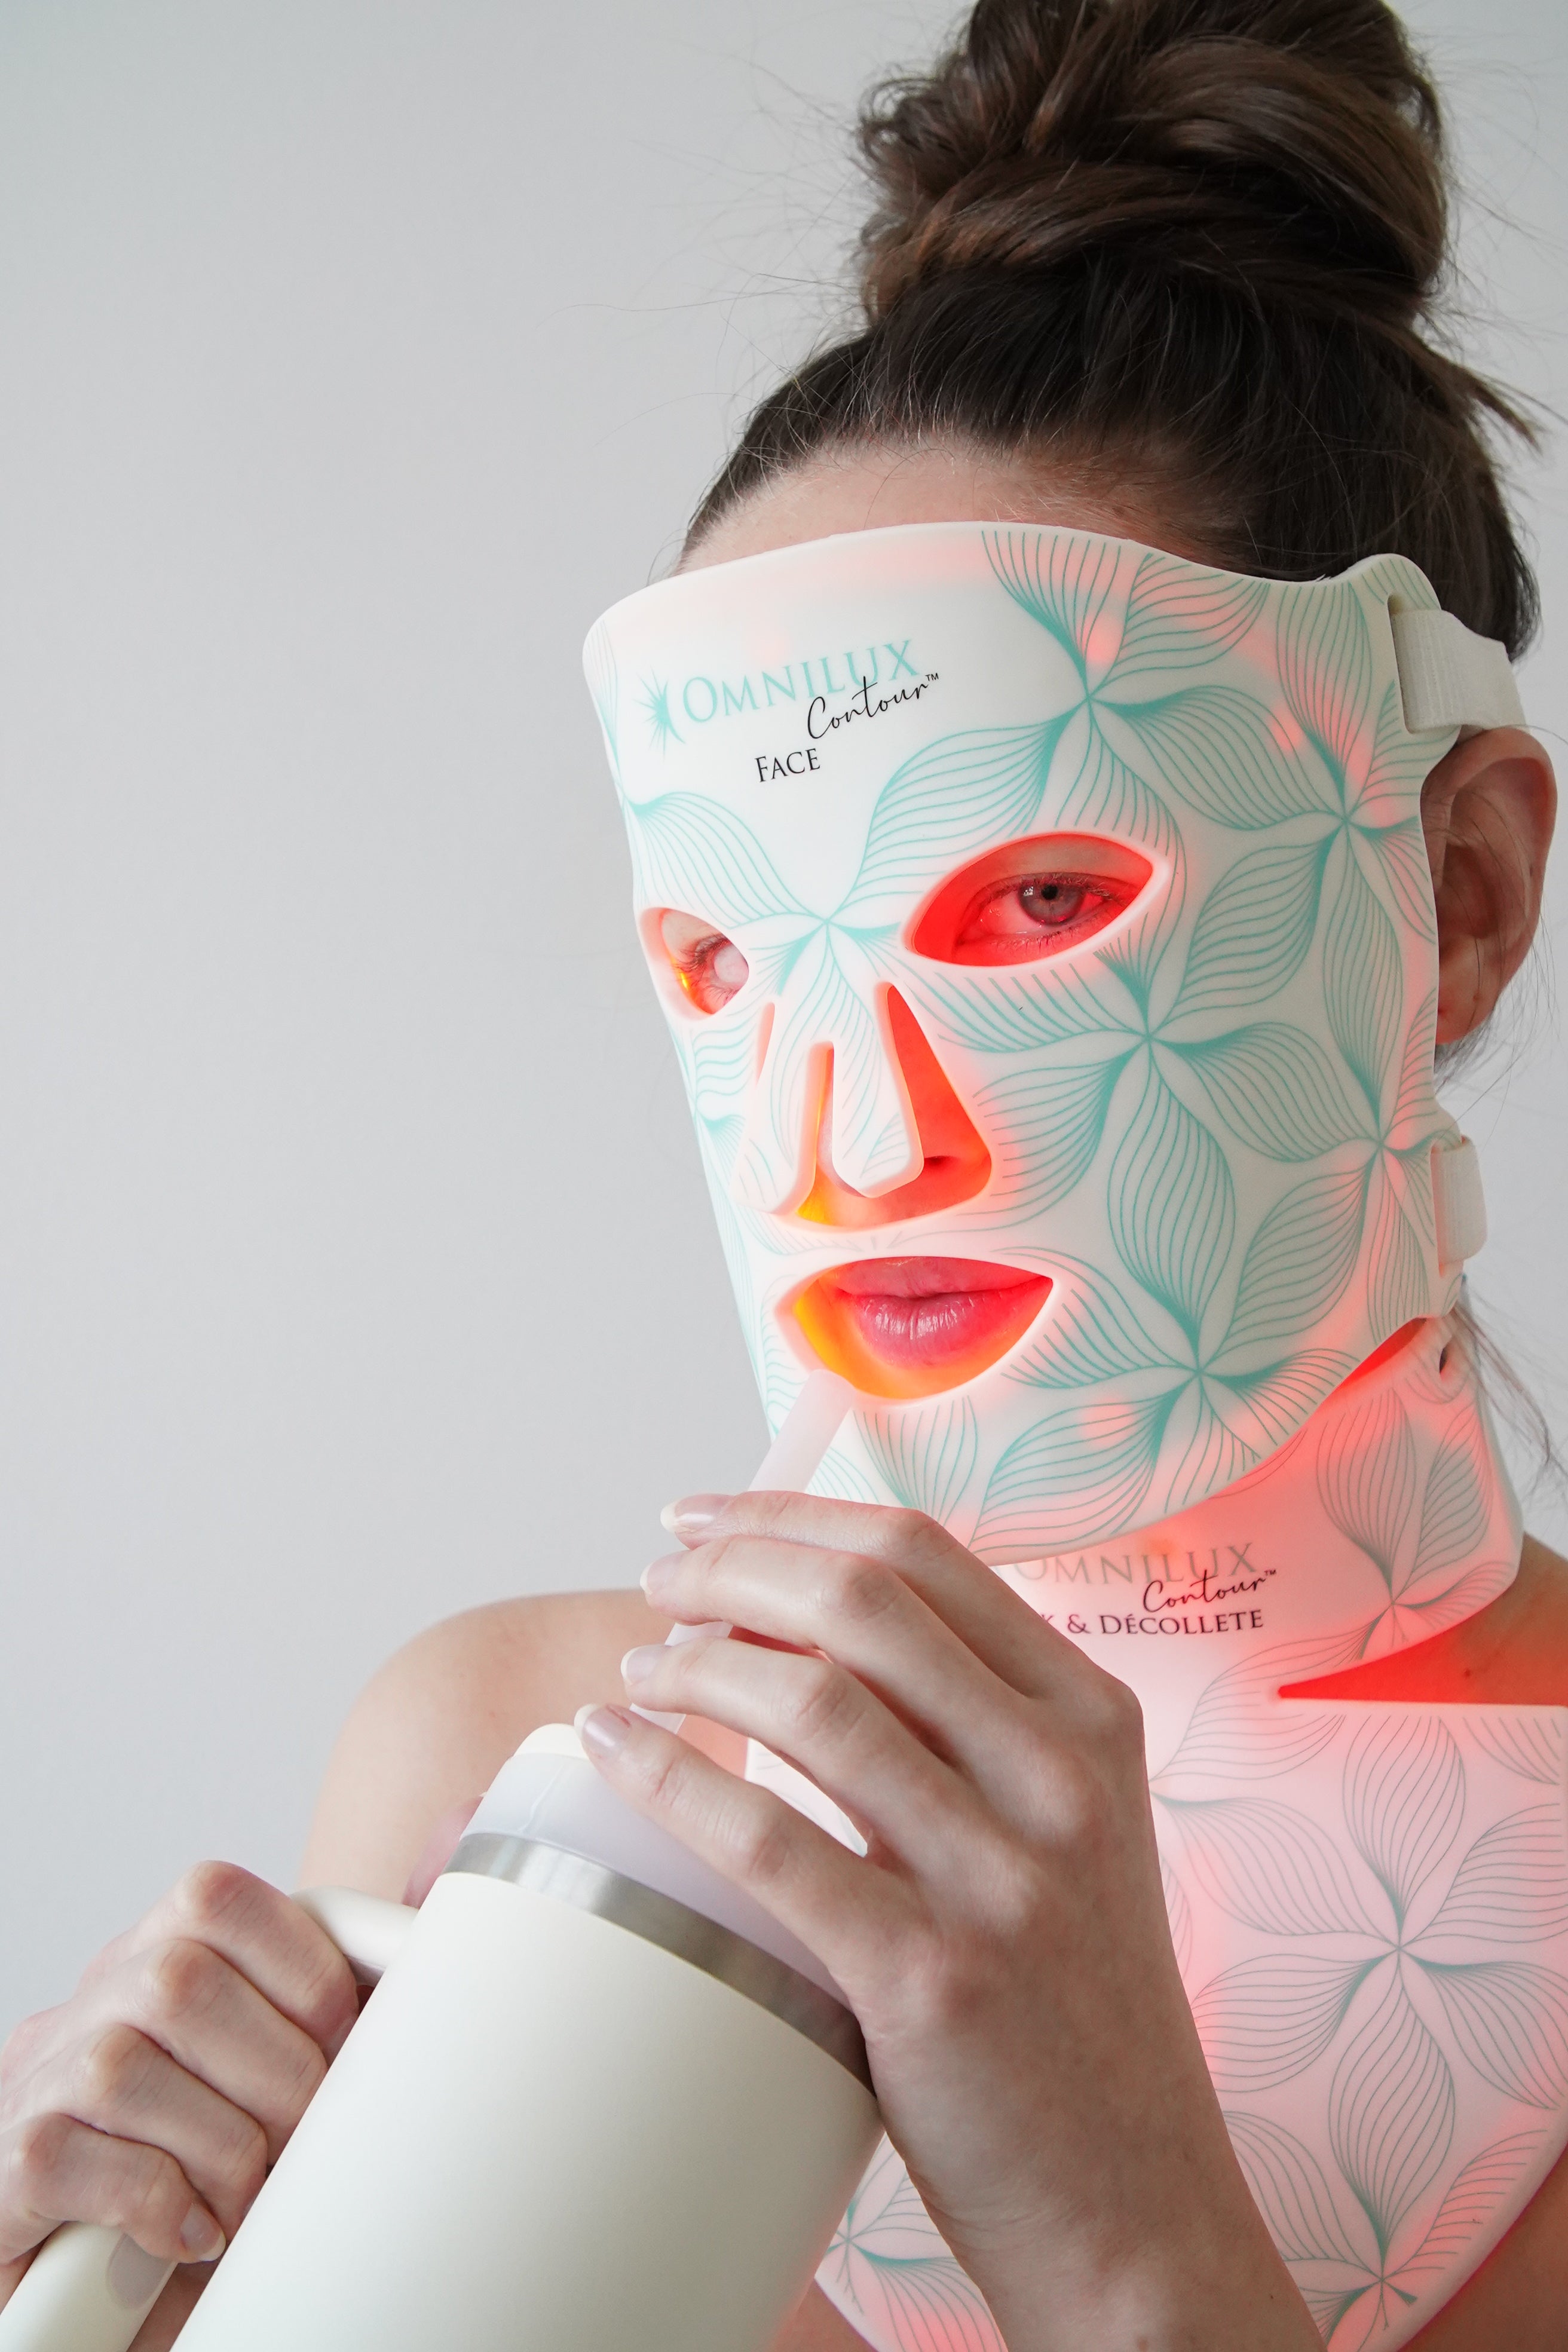 Rejuvenate Your Skin with Red Light Therapy